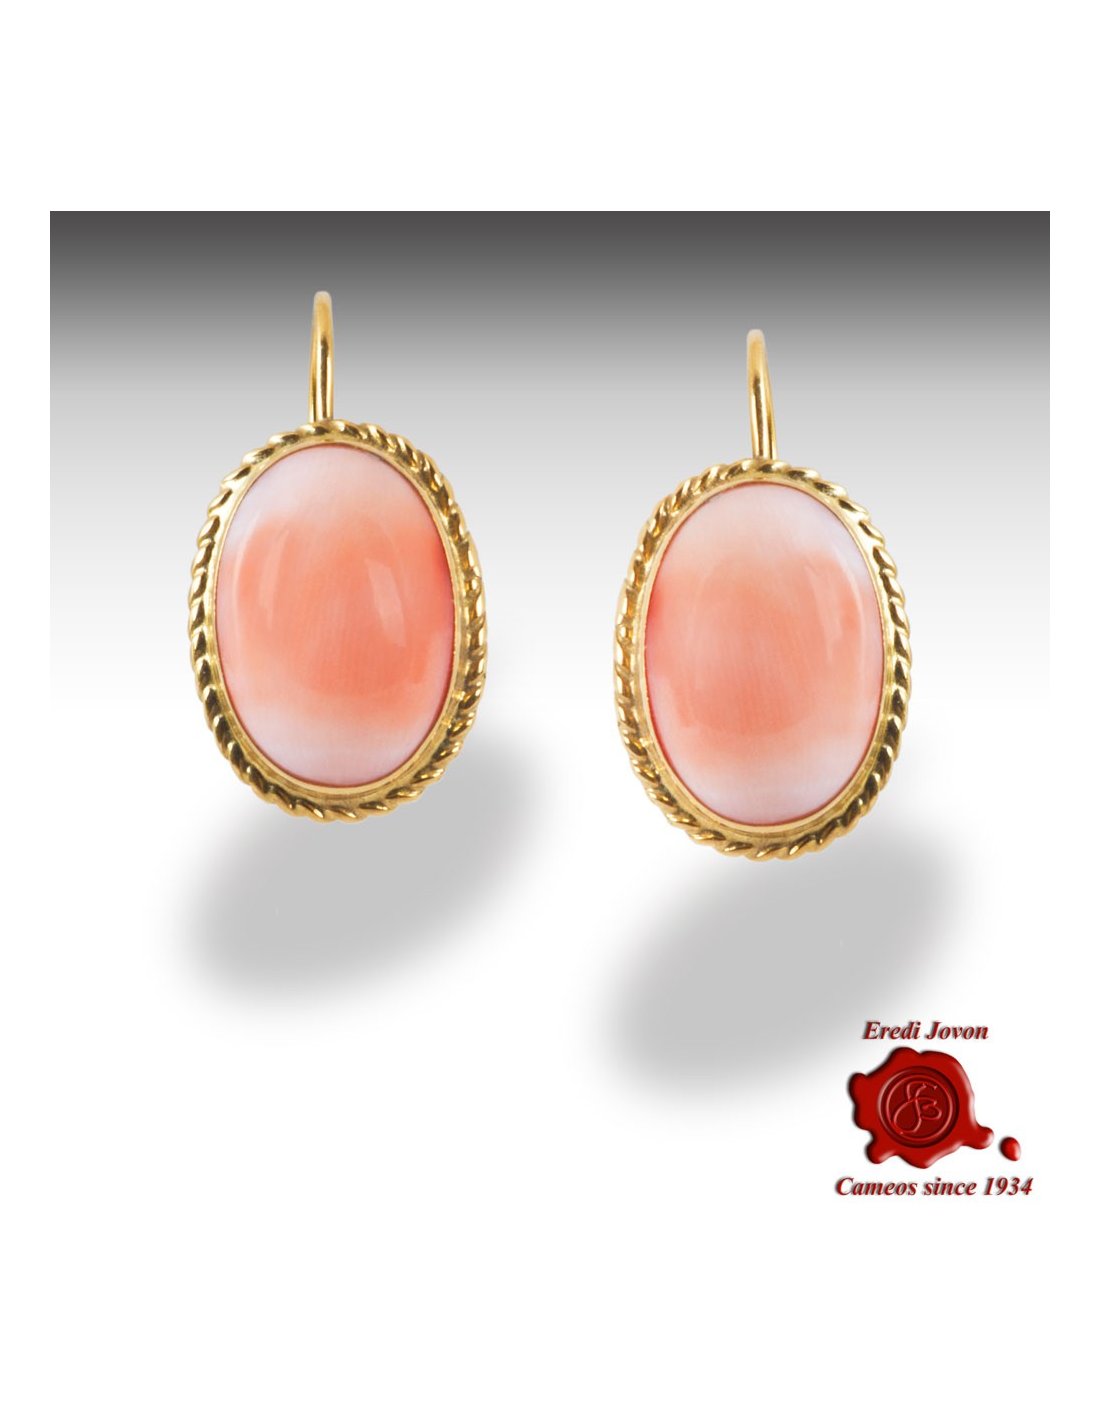 GEM QUALITY GORGEOUS 14K GOLD FILLED 11 MM ANGEL SKIN SEA CORAL EARRINGS 